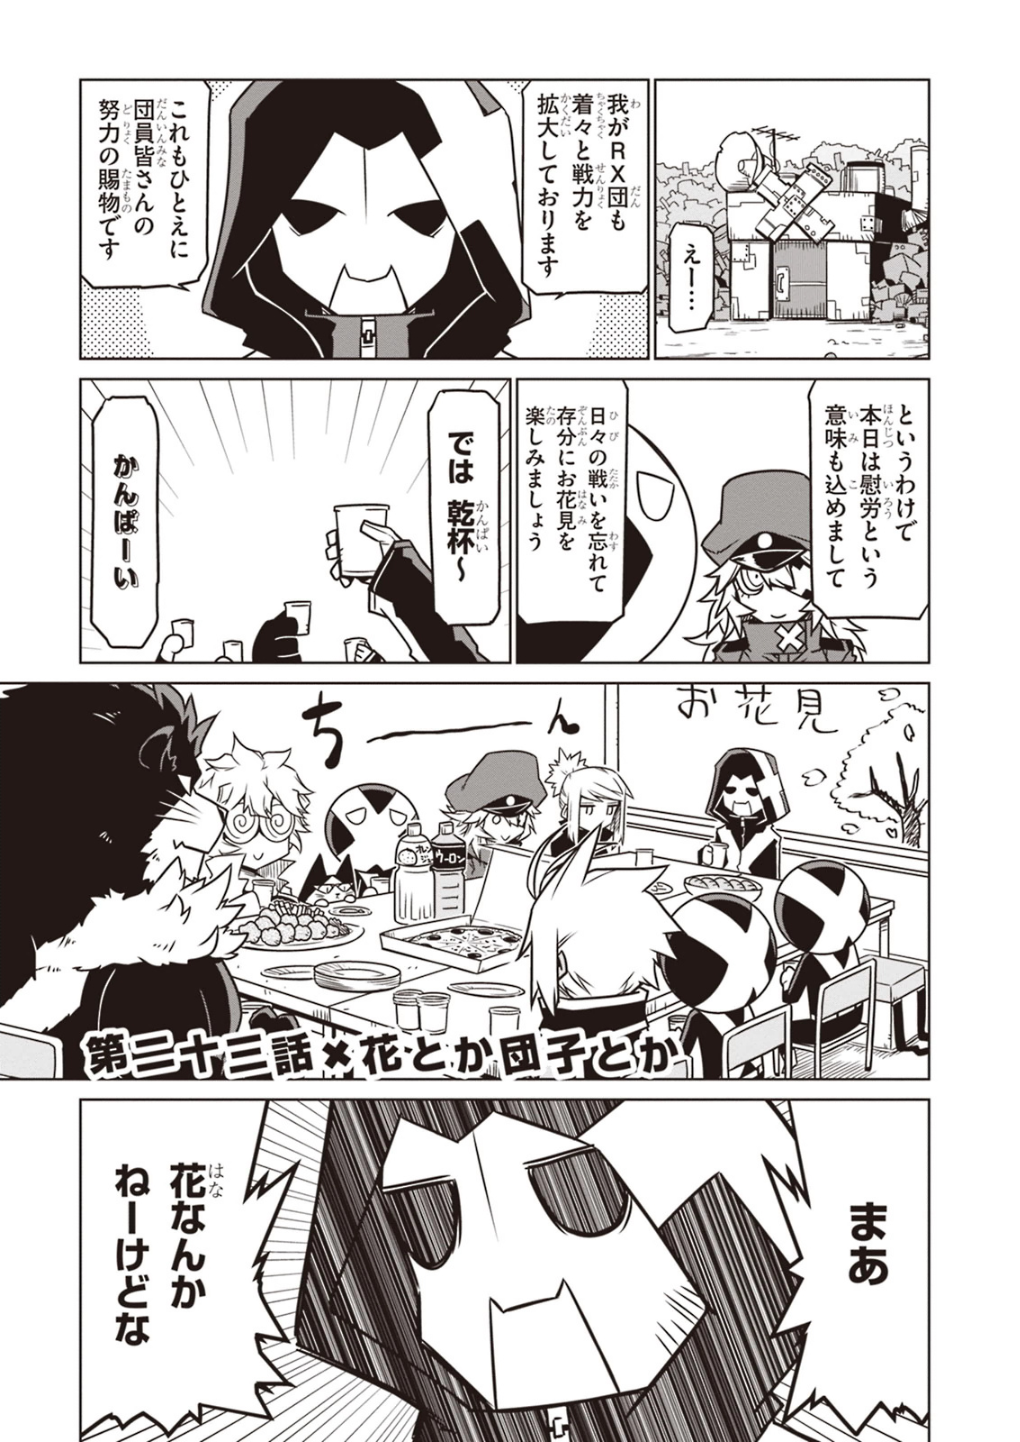 4girls 5boys chair comic cup eyepatch food glasses greyscale hat highres hood hooded_jacket jacket jin_(mugenjin) lion mask monochrome multiple_boys multiple_girls original peaked_cap pizza plate scarf table translated whiteboard